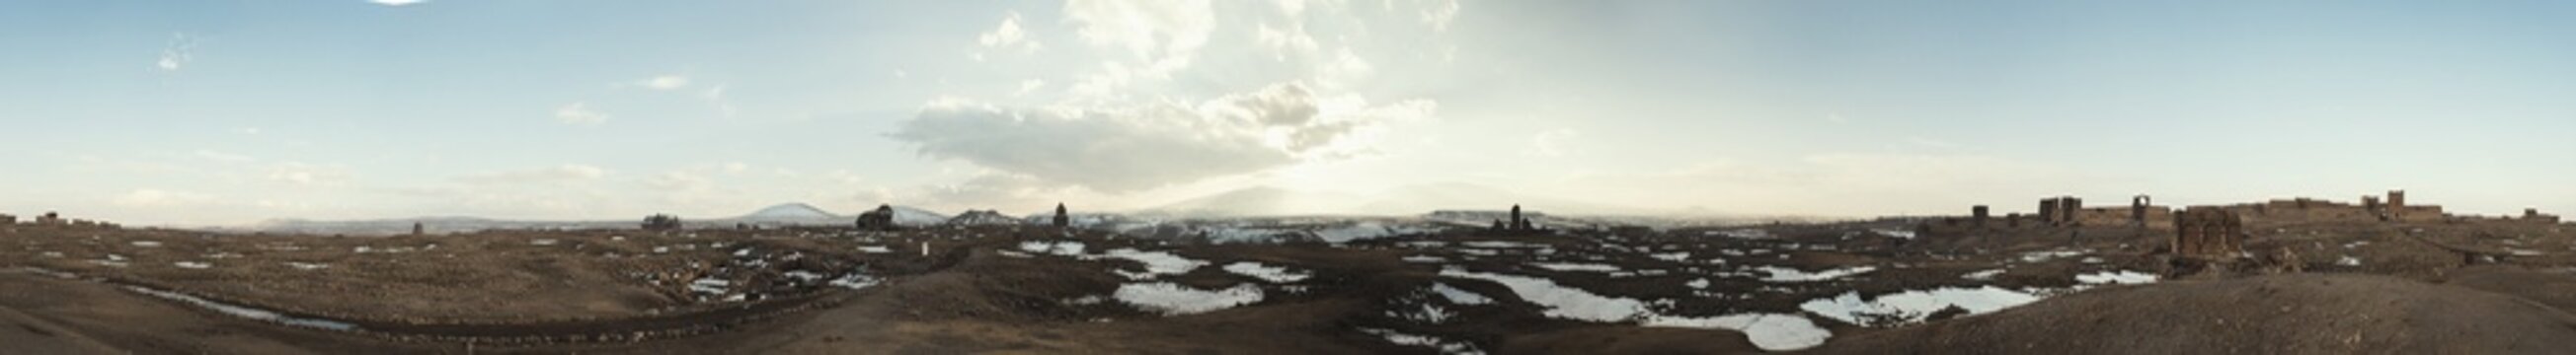 360 Degree panoramic shot of Ani Ancient city with some snow in winter.